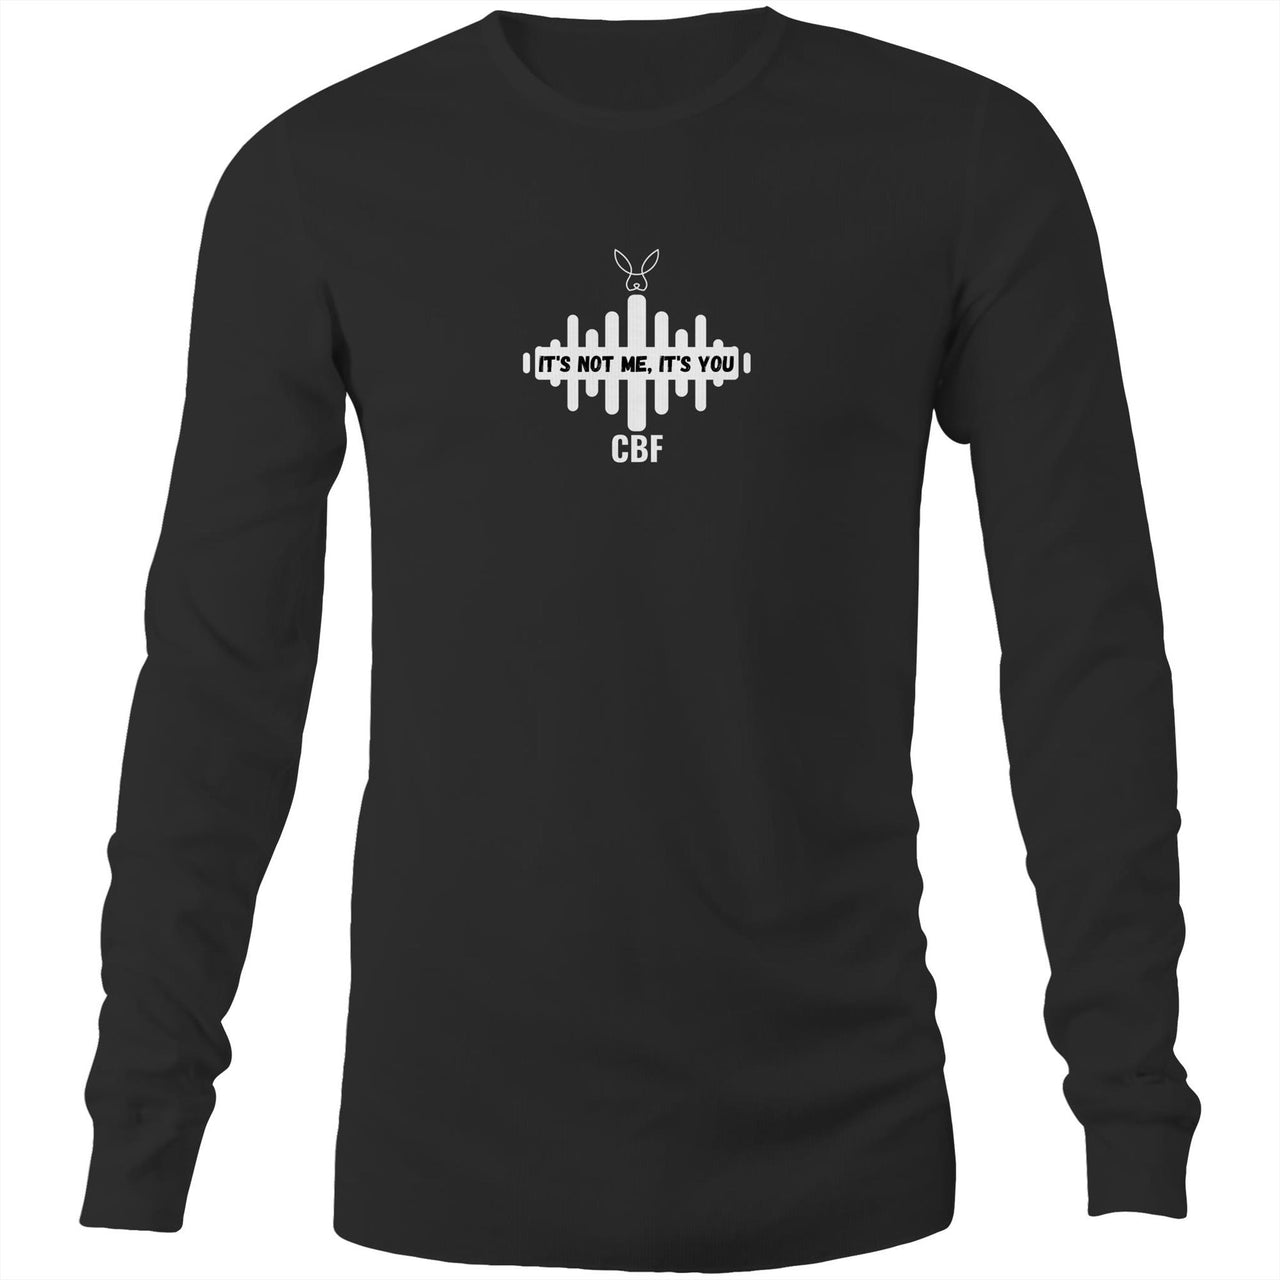 Not me It's You Long Sleeve T-Shirt by CBF Clothing in Black